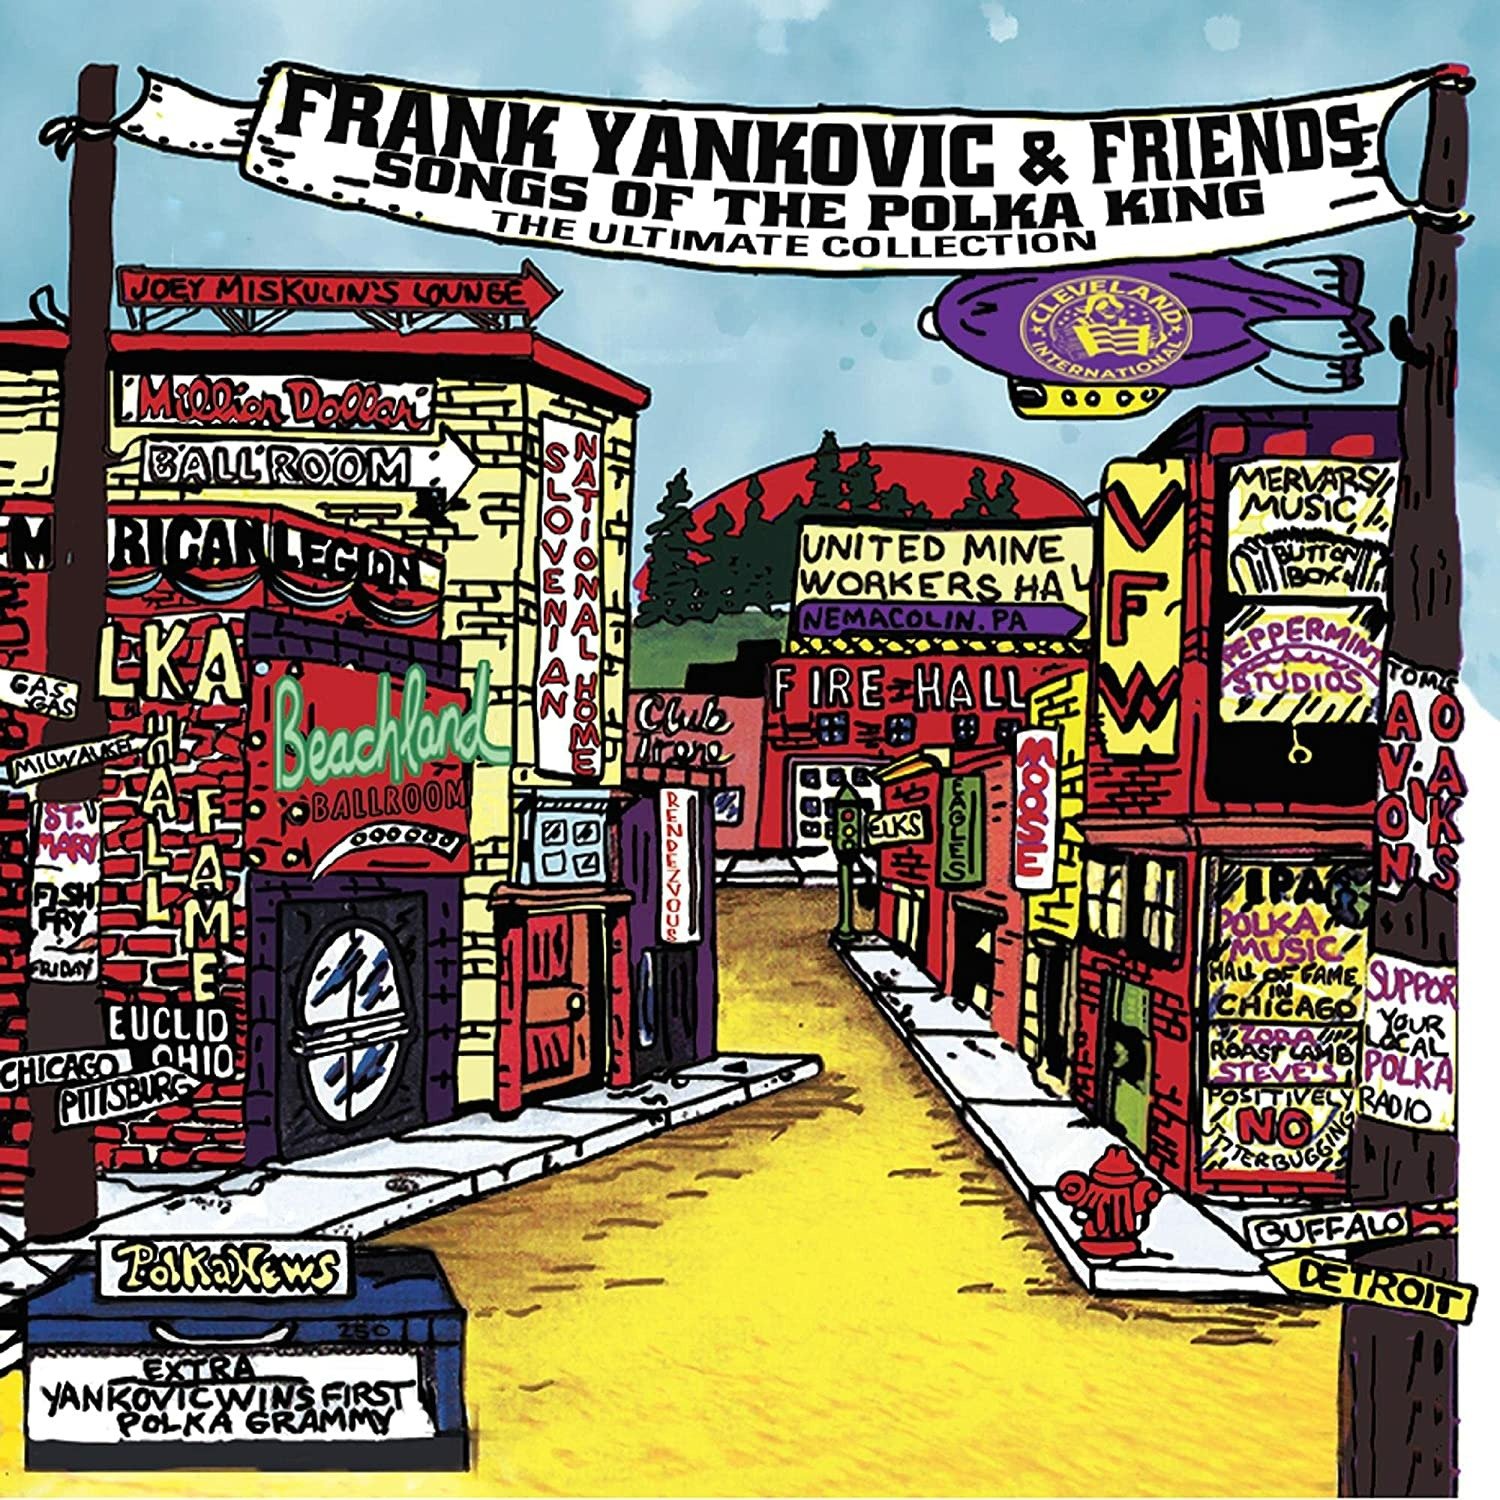 CD Shop - YANKOVIC, FRANK & FRIENDS SONGS OF THE POLKA KING - THE ULTIMATE COLLECTION